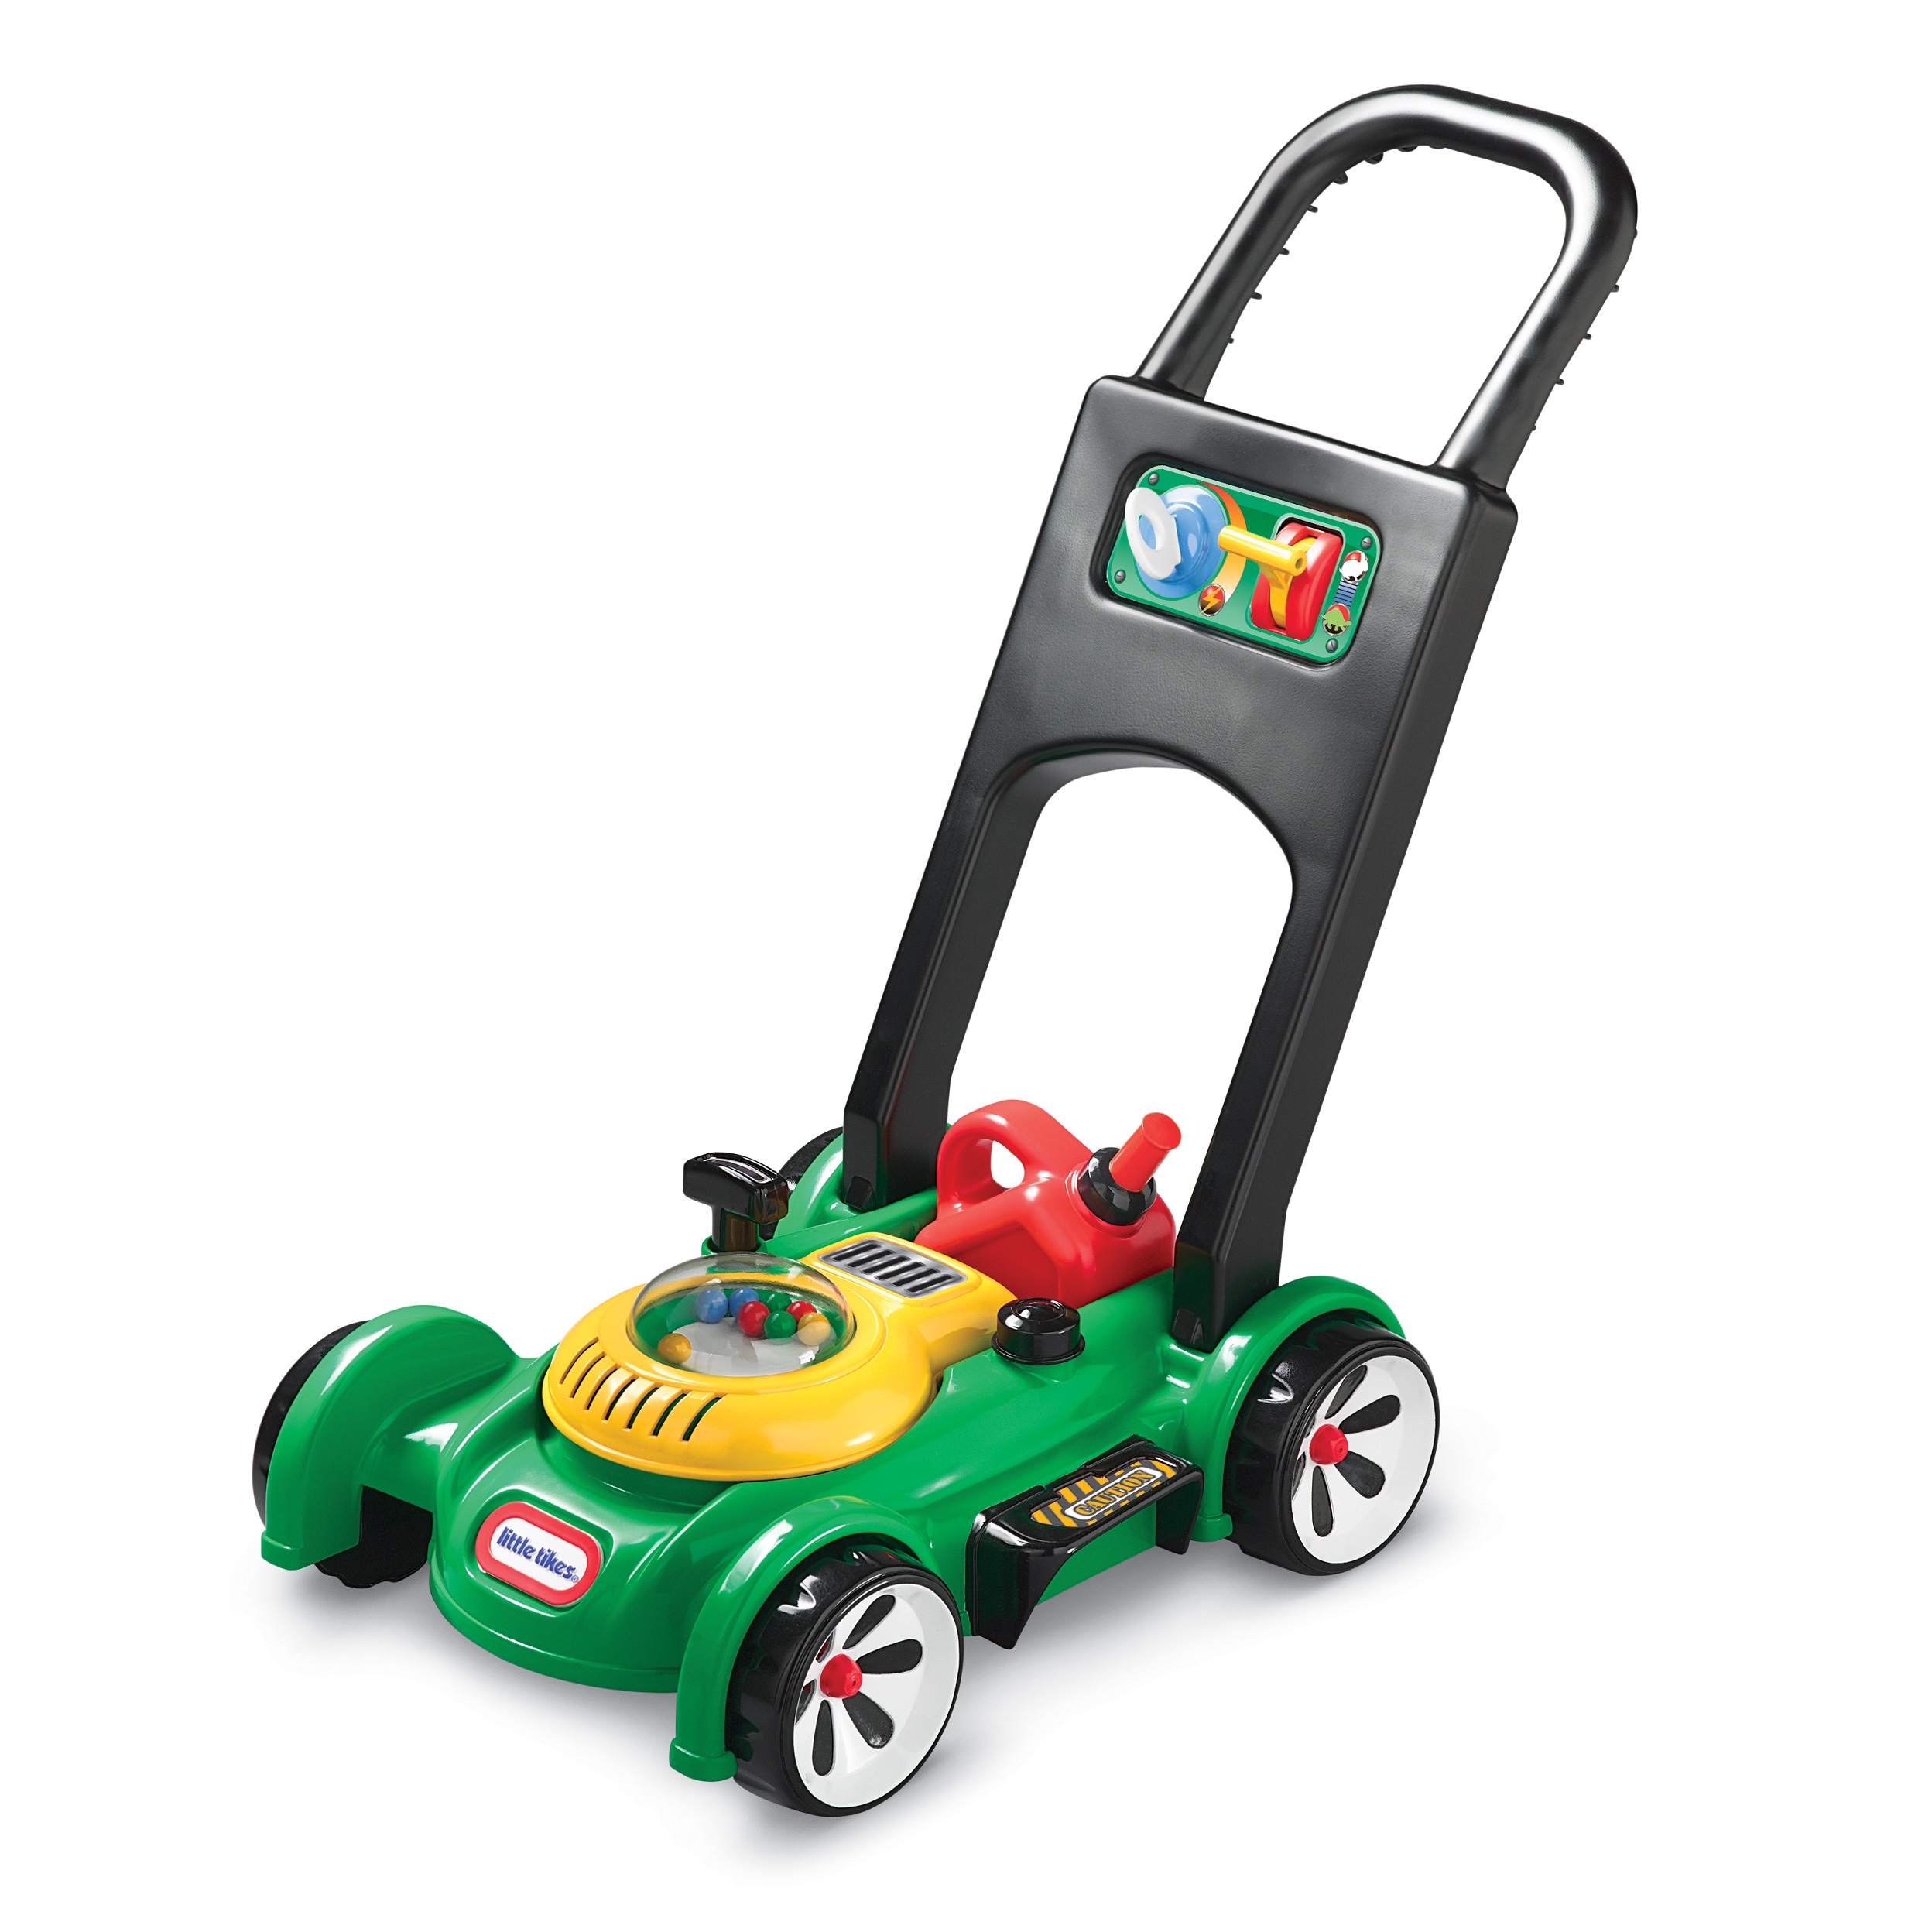 Little Tikes Gas N Go Mower Toddler Push Toy - For Kids Boys Girls Ages 1.5 Years and Older - image 1 of 7